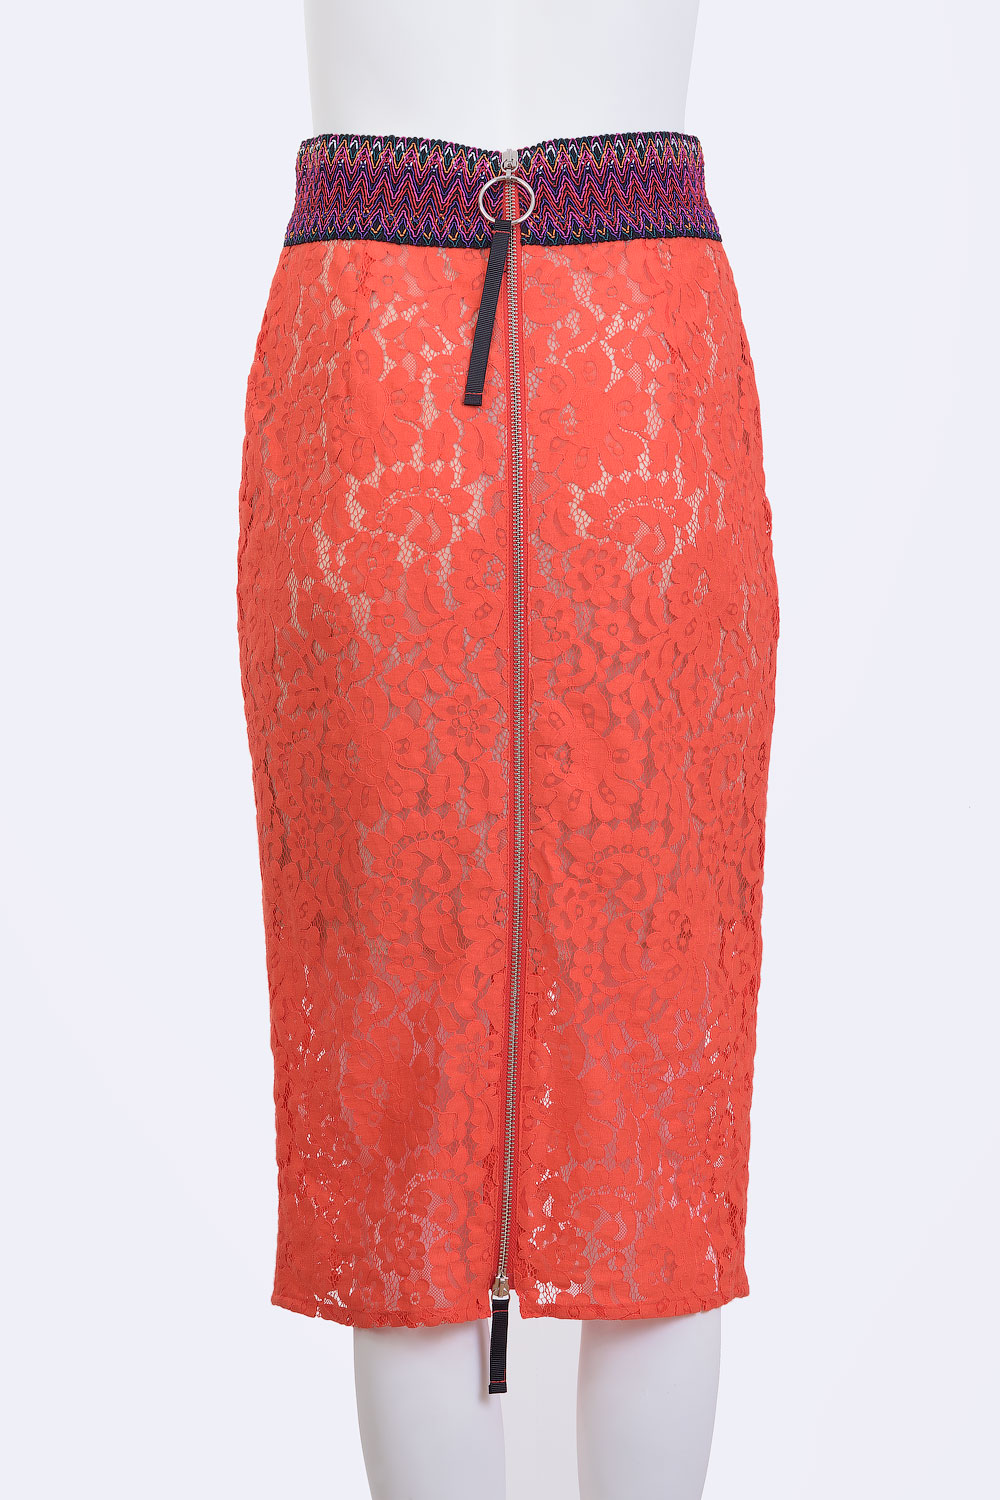 TENAX Red Lace Skirt with Back Zipper - CLADDIO